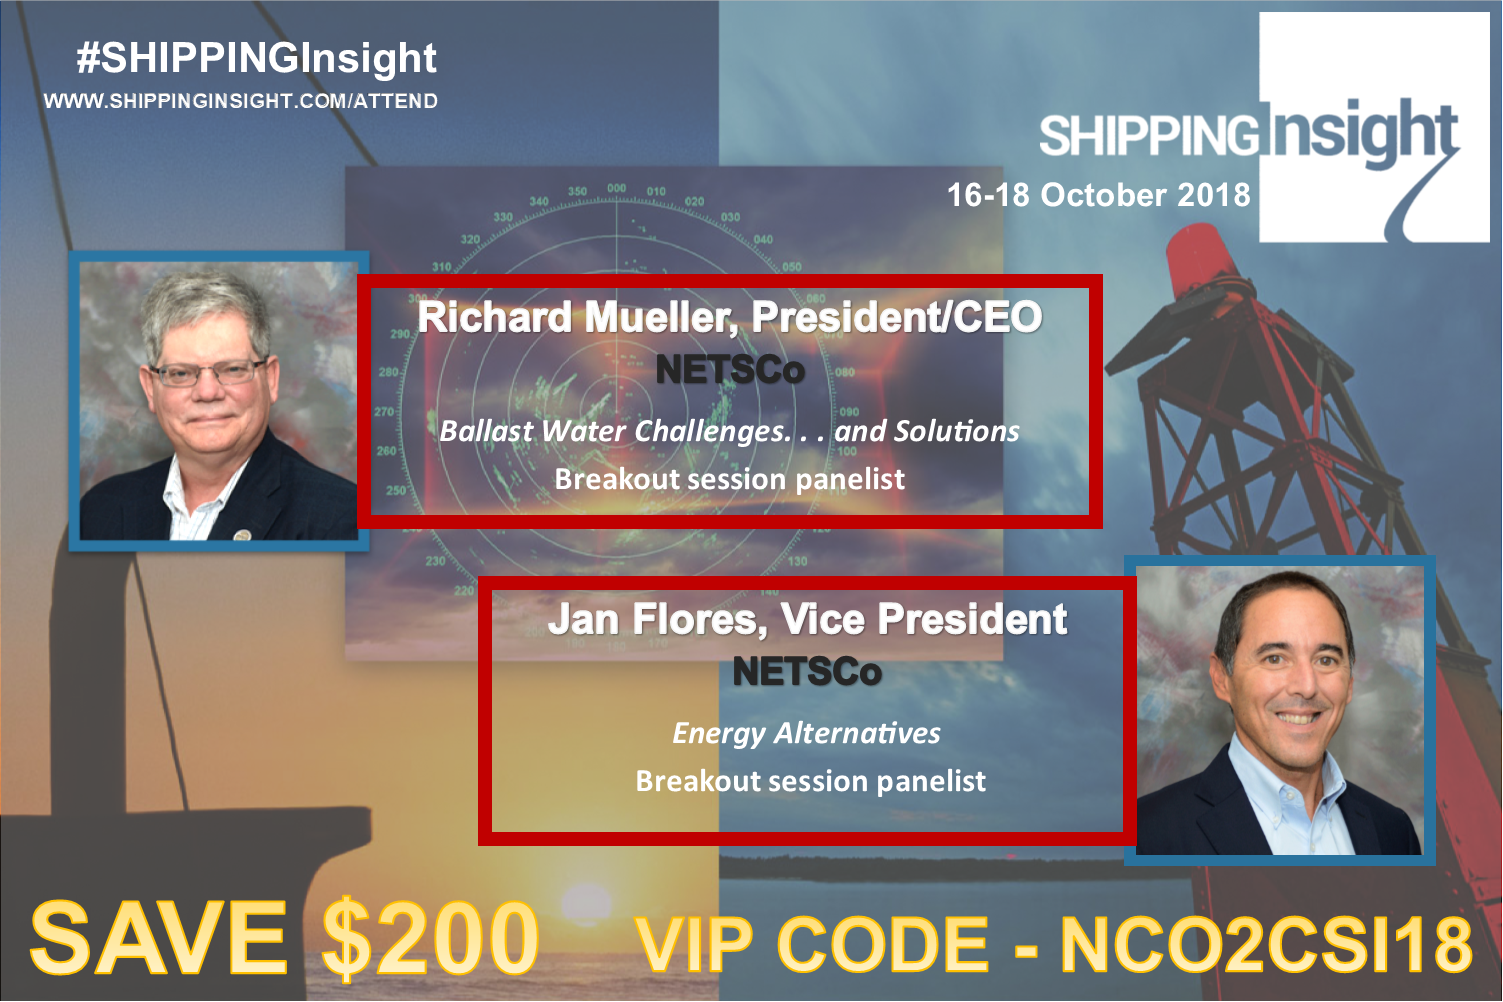 Postcard invite to join shippinginsight